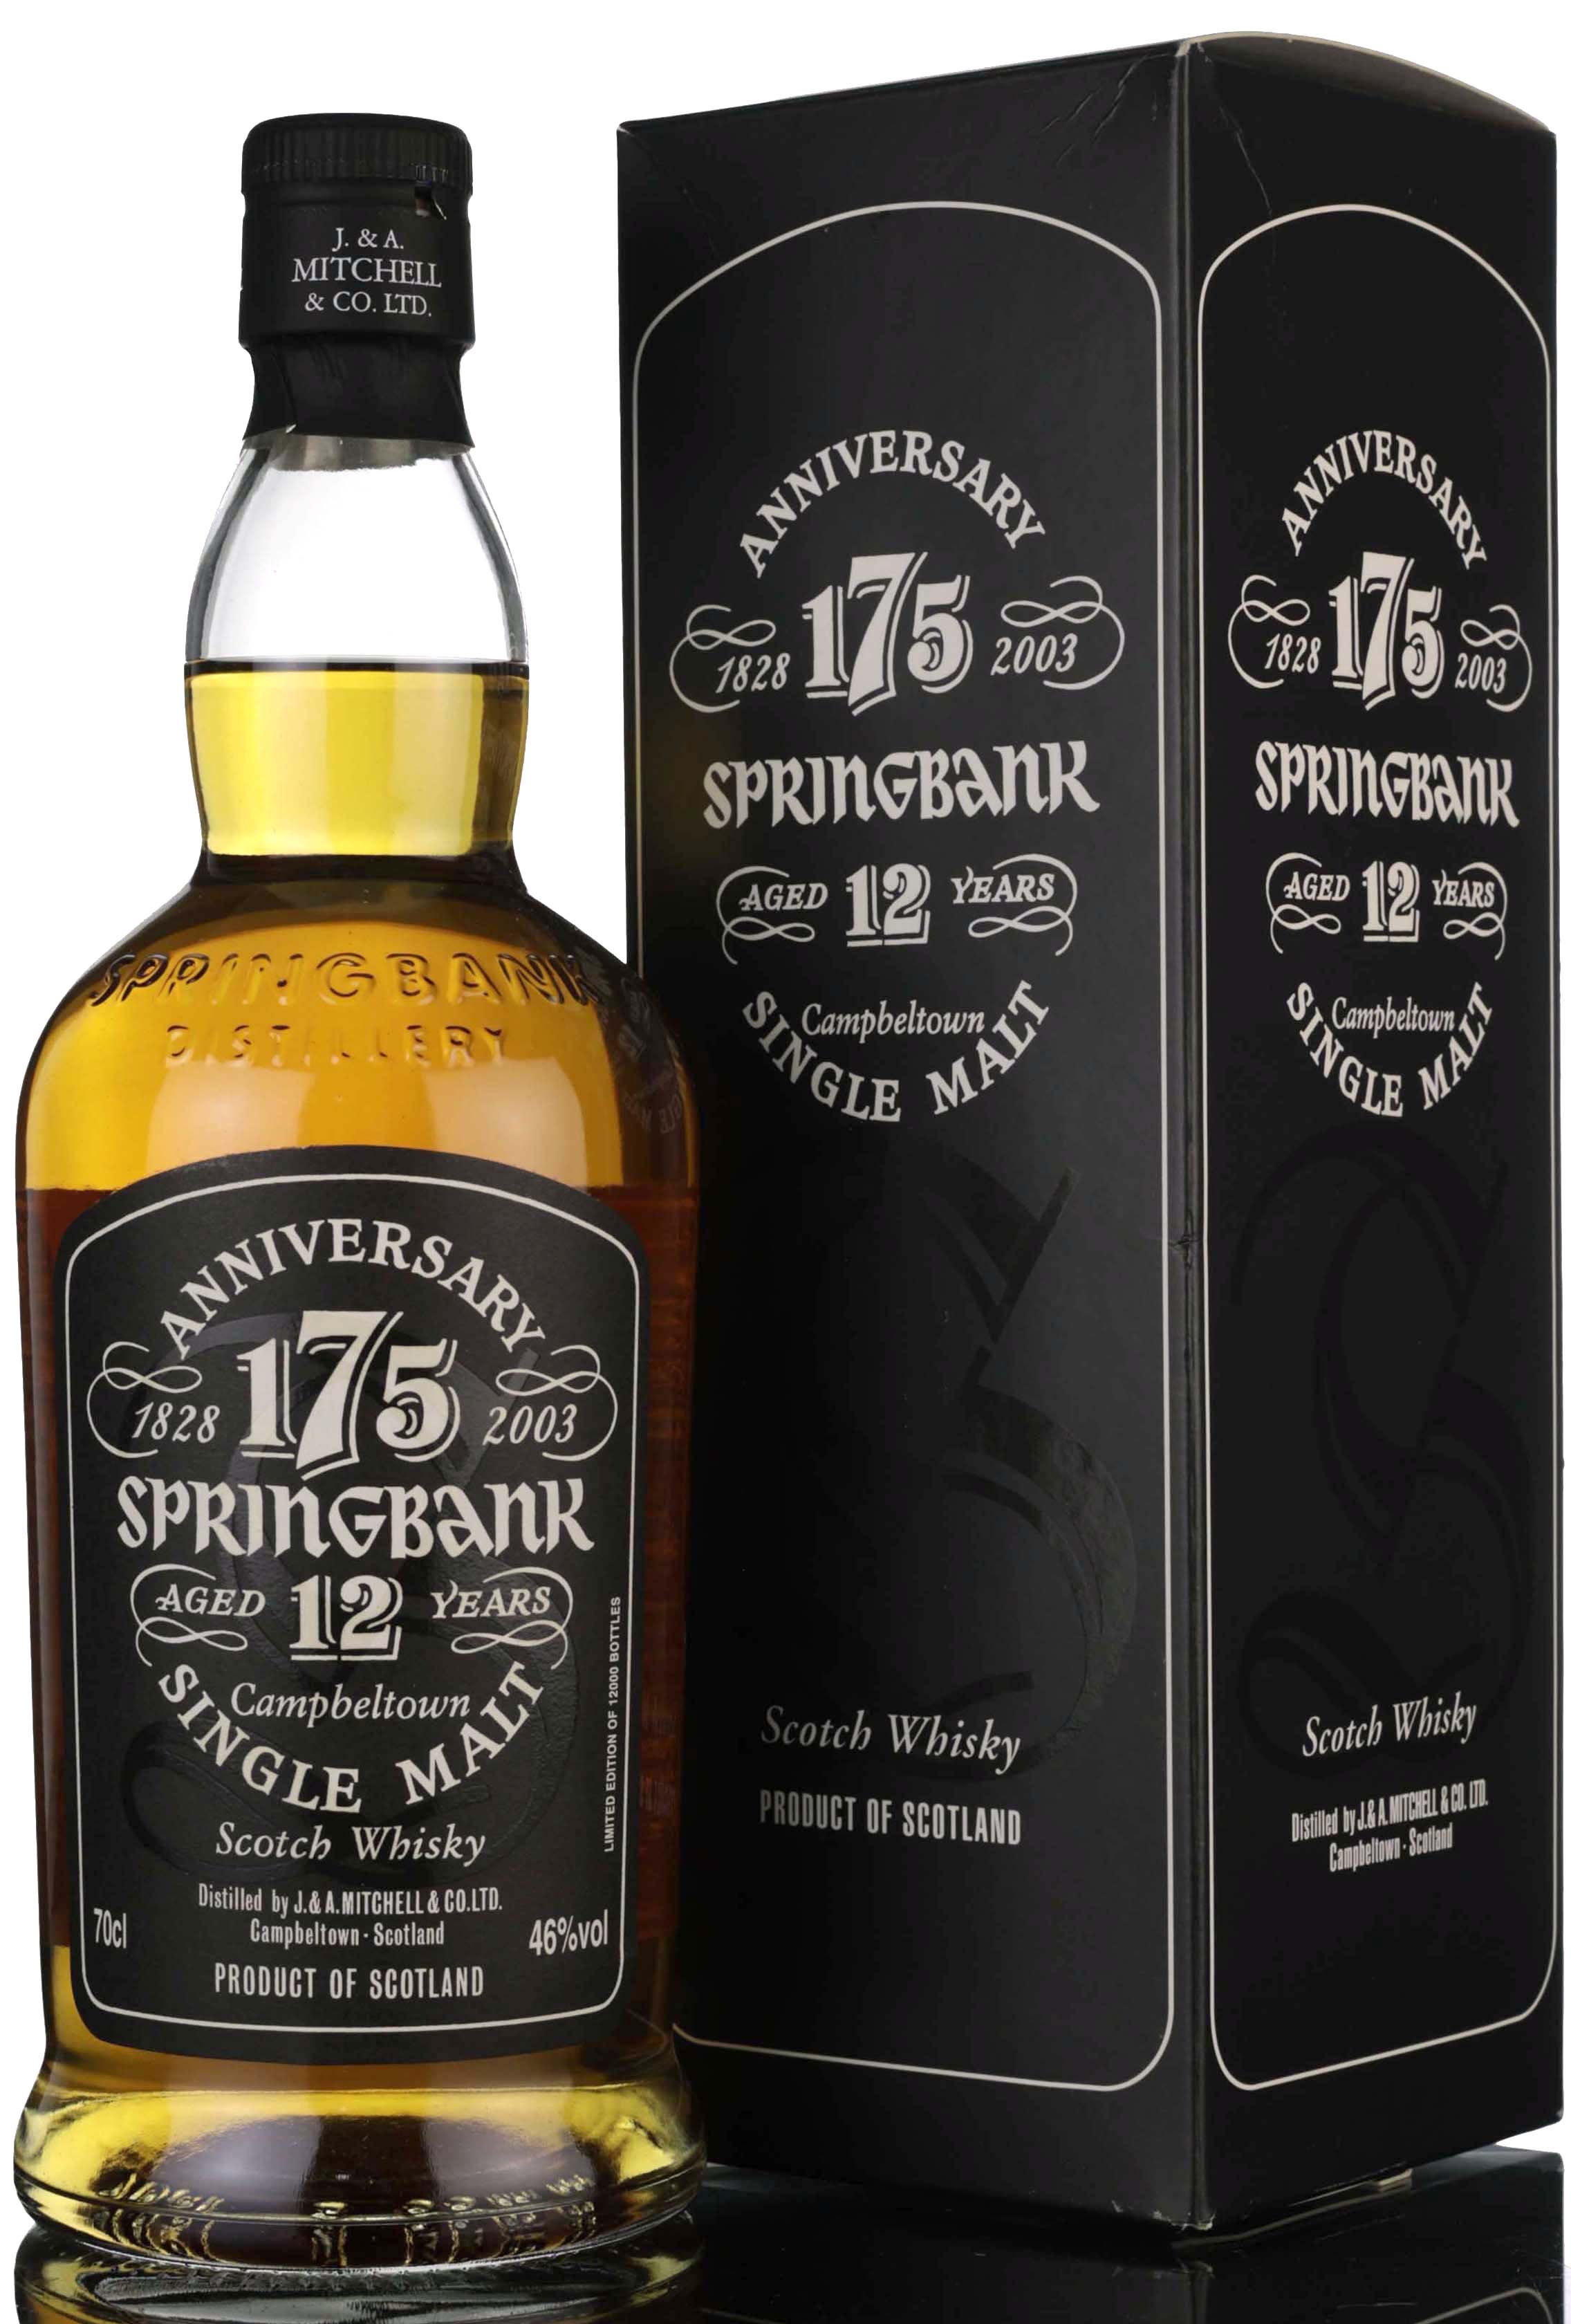 Springbank 12 Year Old - 175th Anniversary 1828-2003